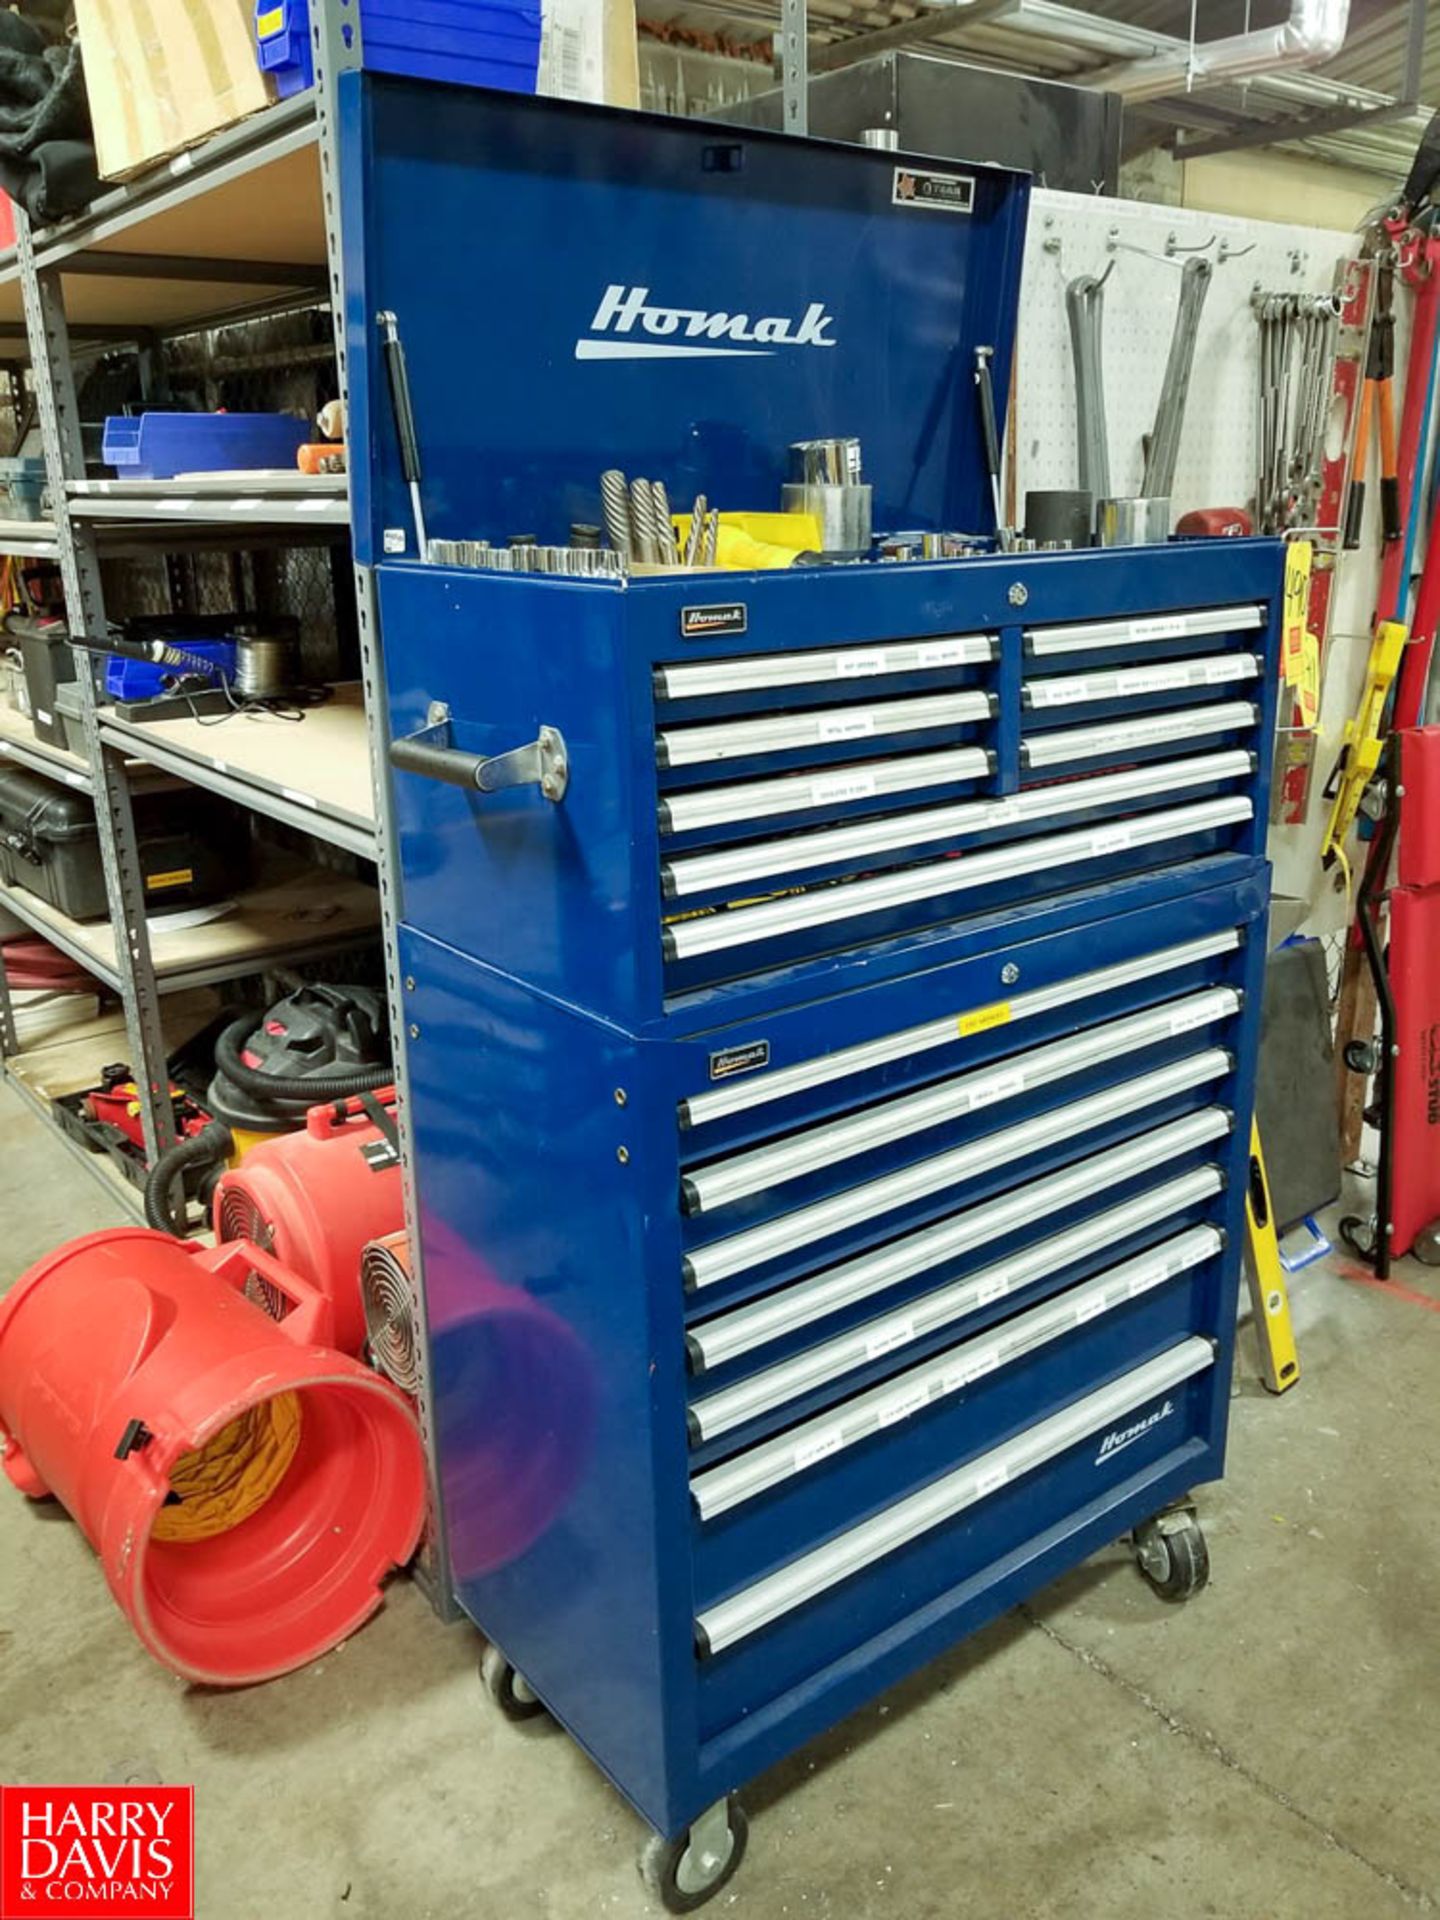 Homak 15-Drawer Rolling Tool Box with Contents of Assorted Sockets Nut Drivers Hammers Allen